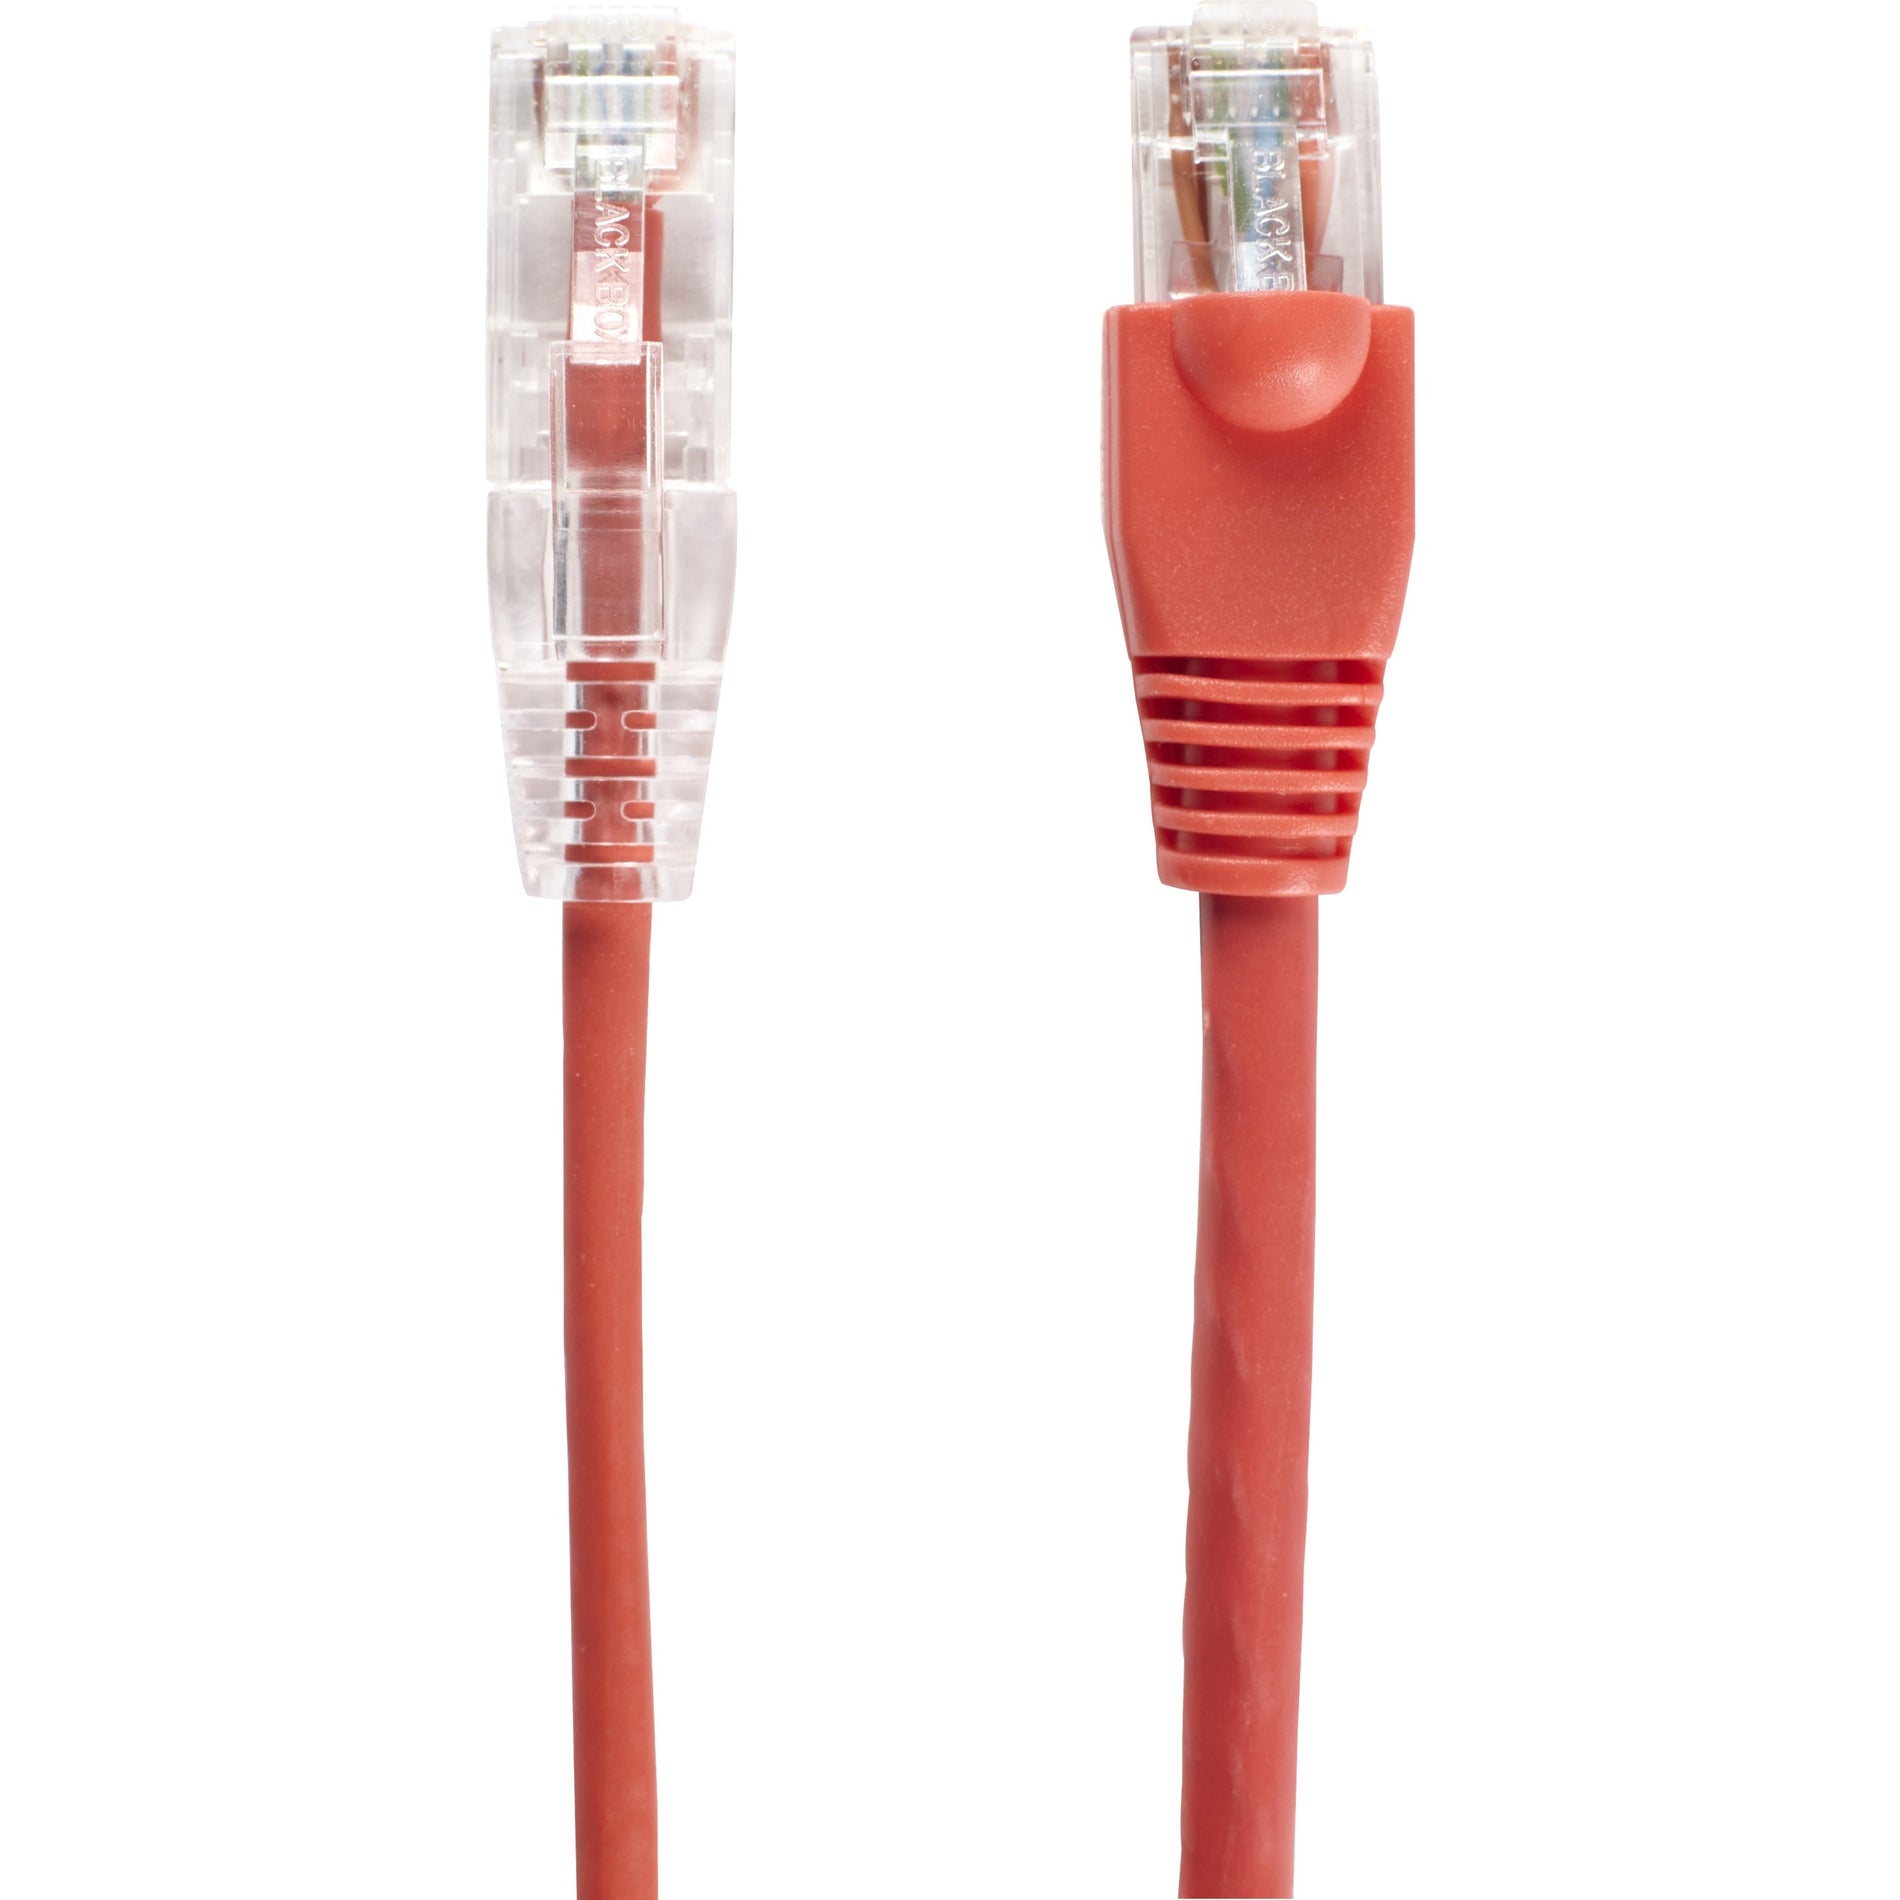 Black Box C6PC28-RD-03 Slim-Net Cat.6 UTP Patch Network Cable, 3 ft, Red